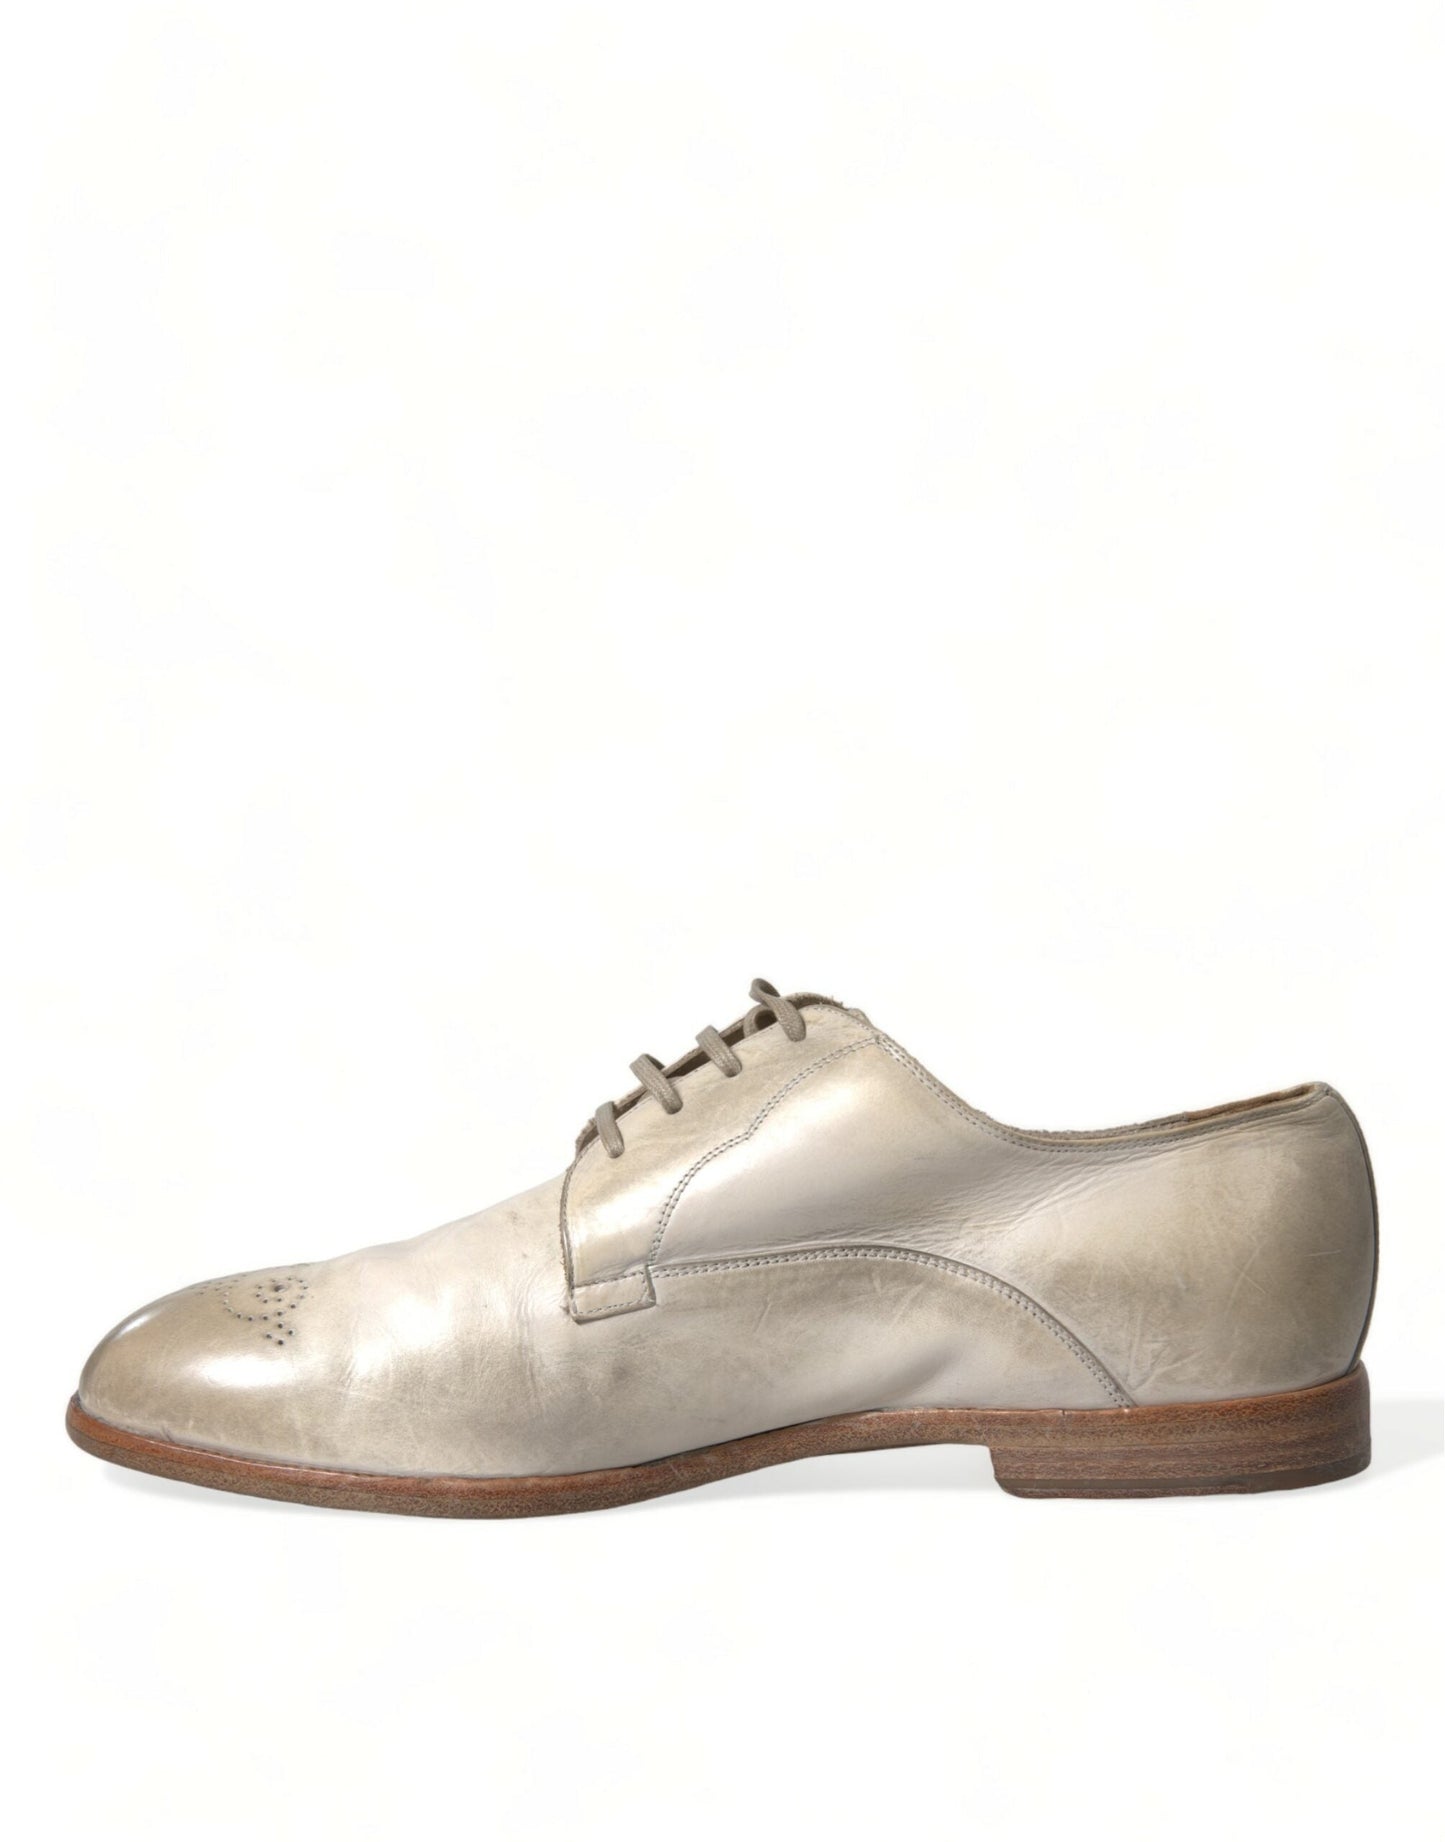 Dolce & Gabbana White Distressed Leather Derby Dress Shoes | Fashionsarah.com